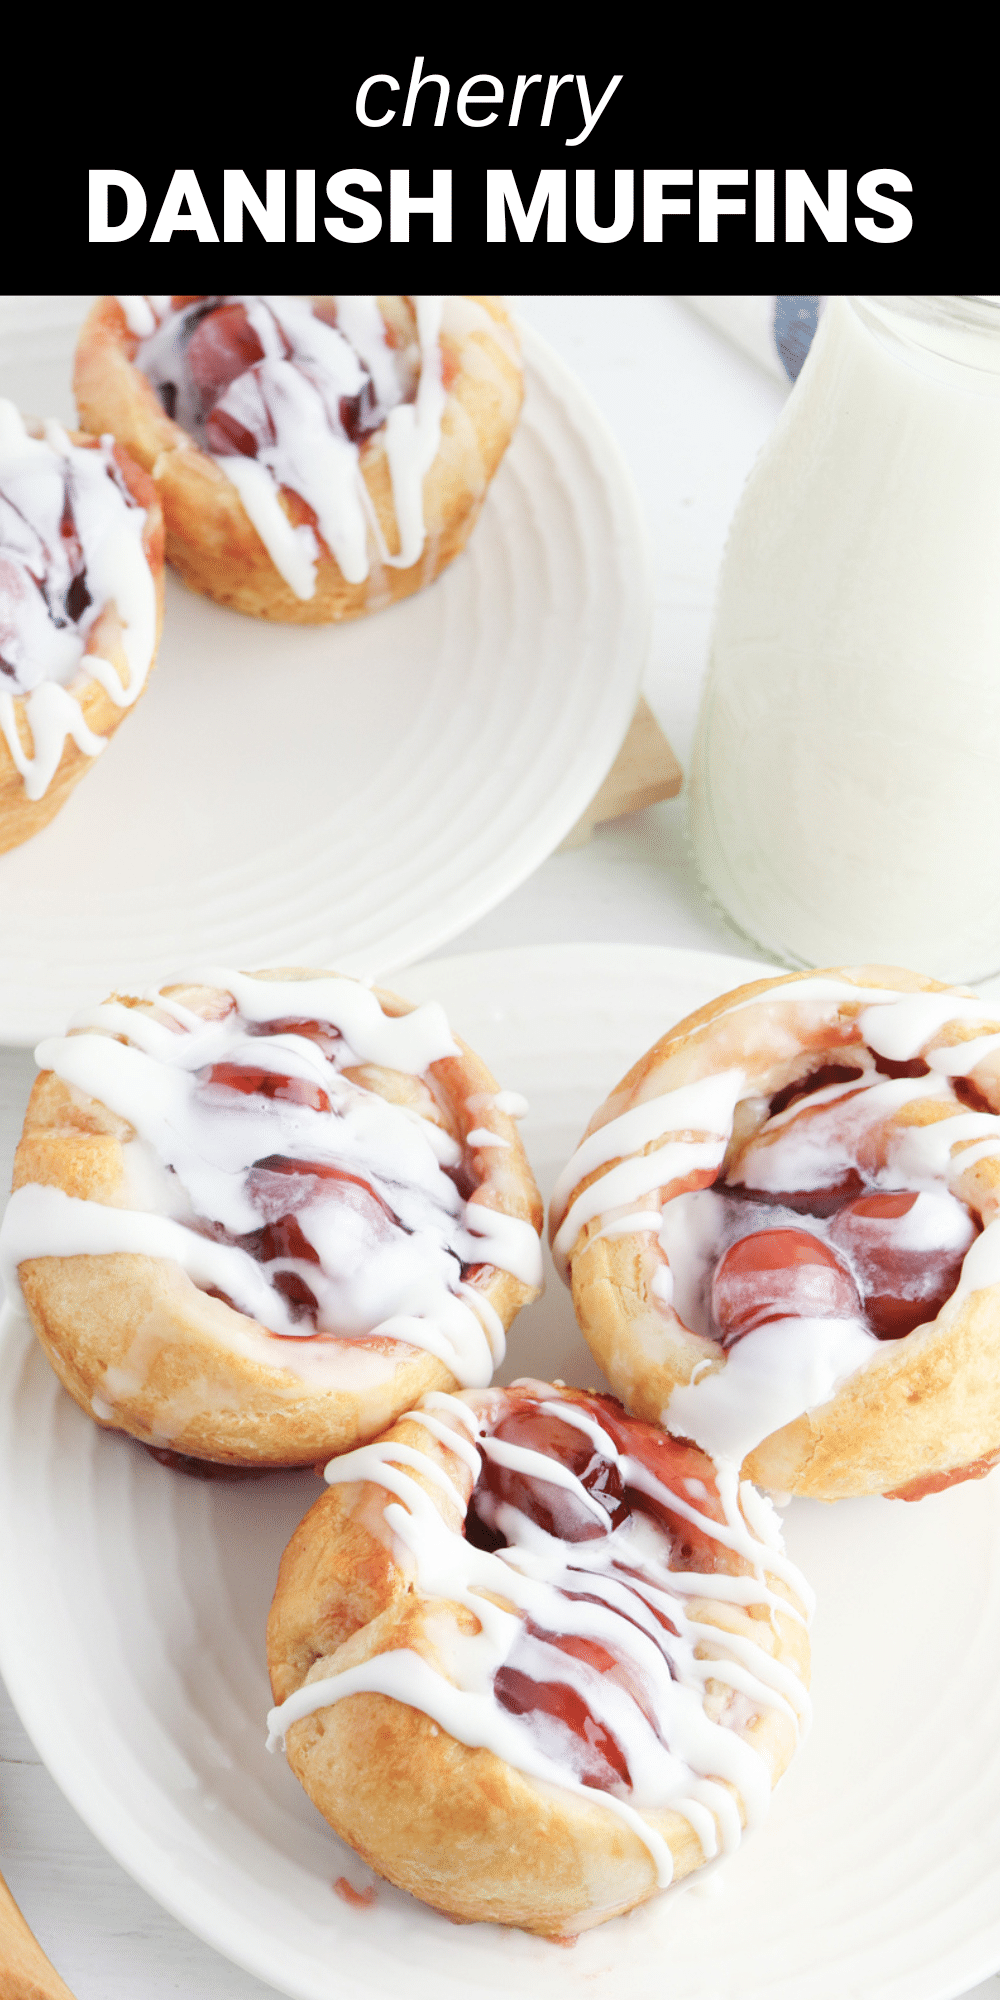 These cherry danish muffins are an easy and delicious breakfast or dessert that the whole family will love. Flaky crescent roll dough is filled with a rich vanilla cream cheese mixture and topped with cherry pie filling, then baked to a perfect golden brown and topped with a sweet glaze.